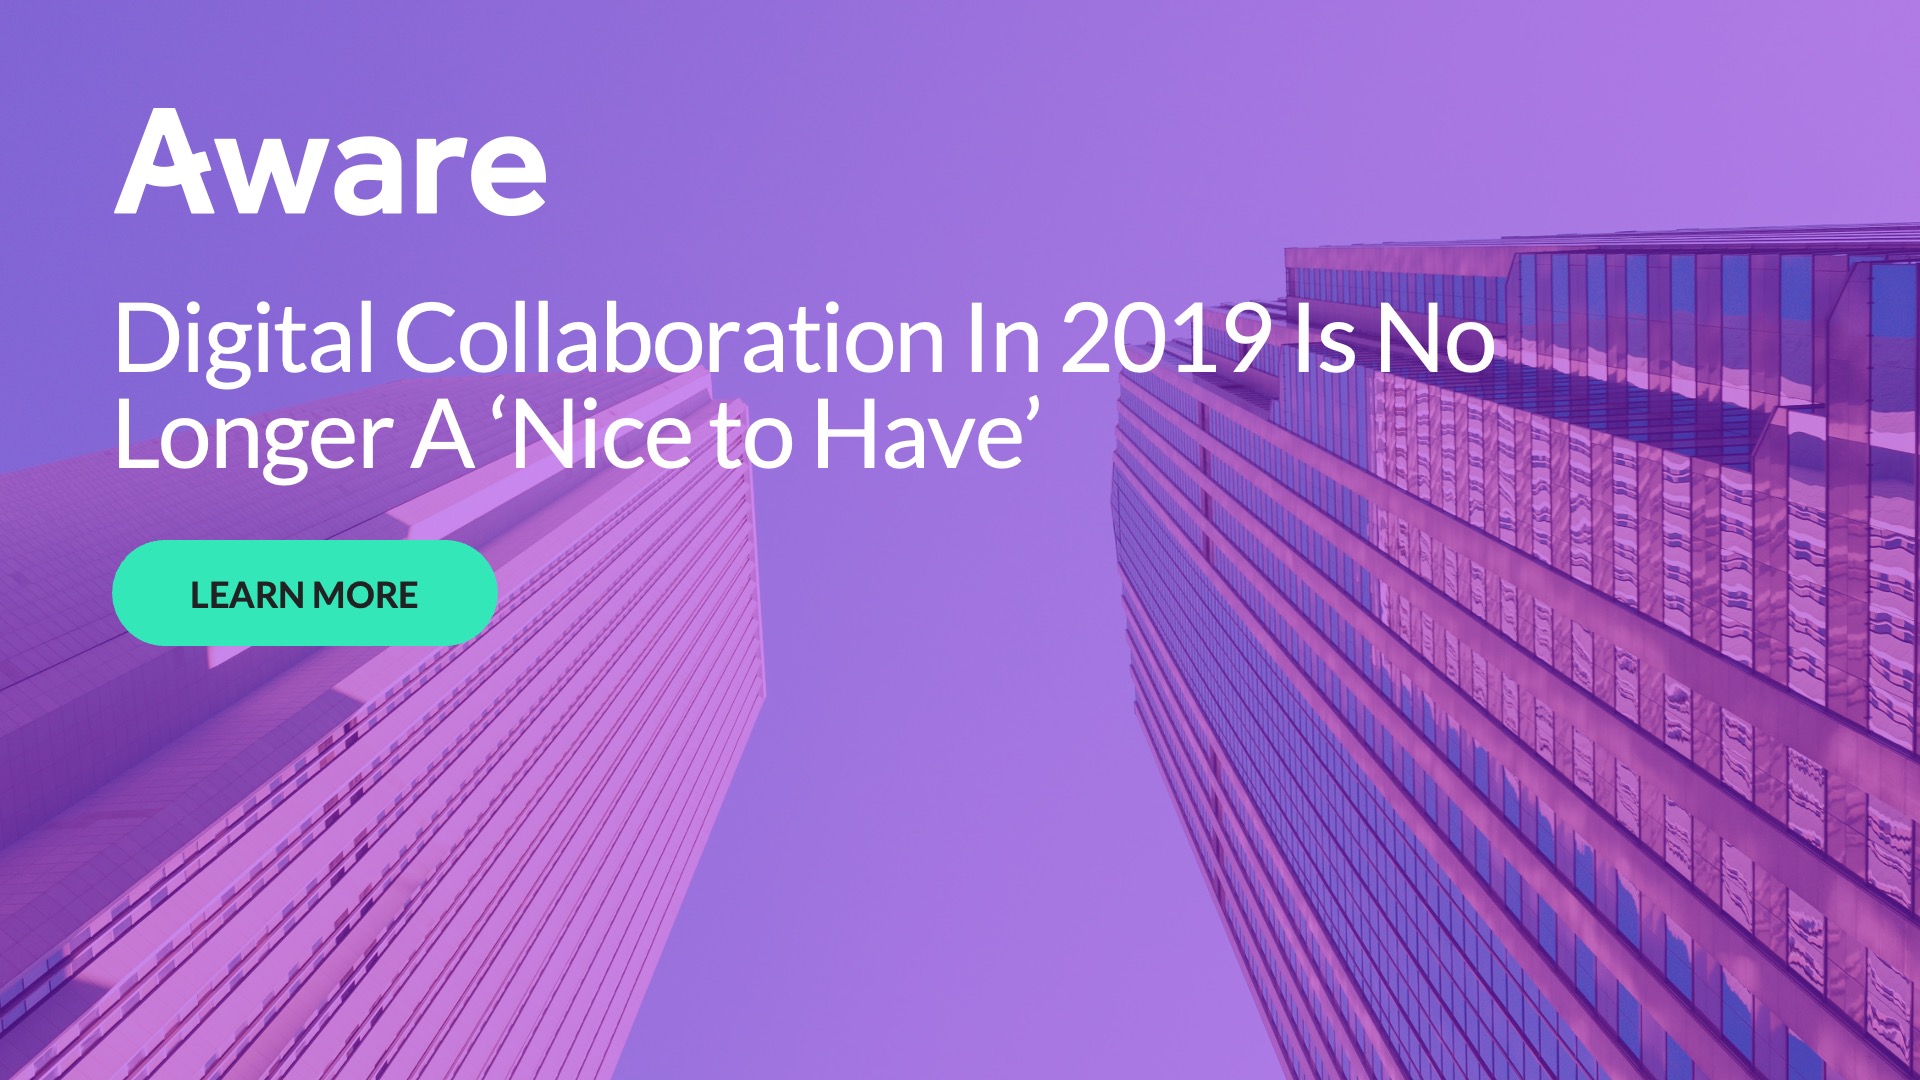 Digital Collaboration In 2019 Is No Longer A ‘Nice to Have’